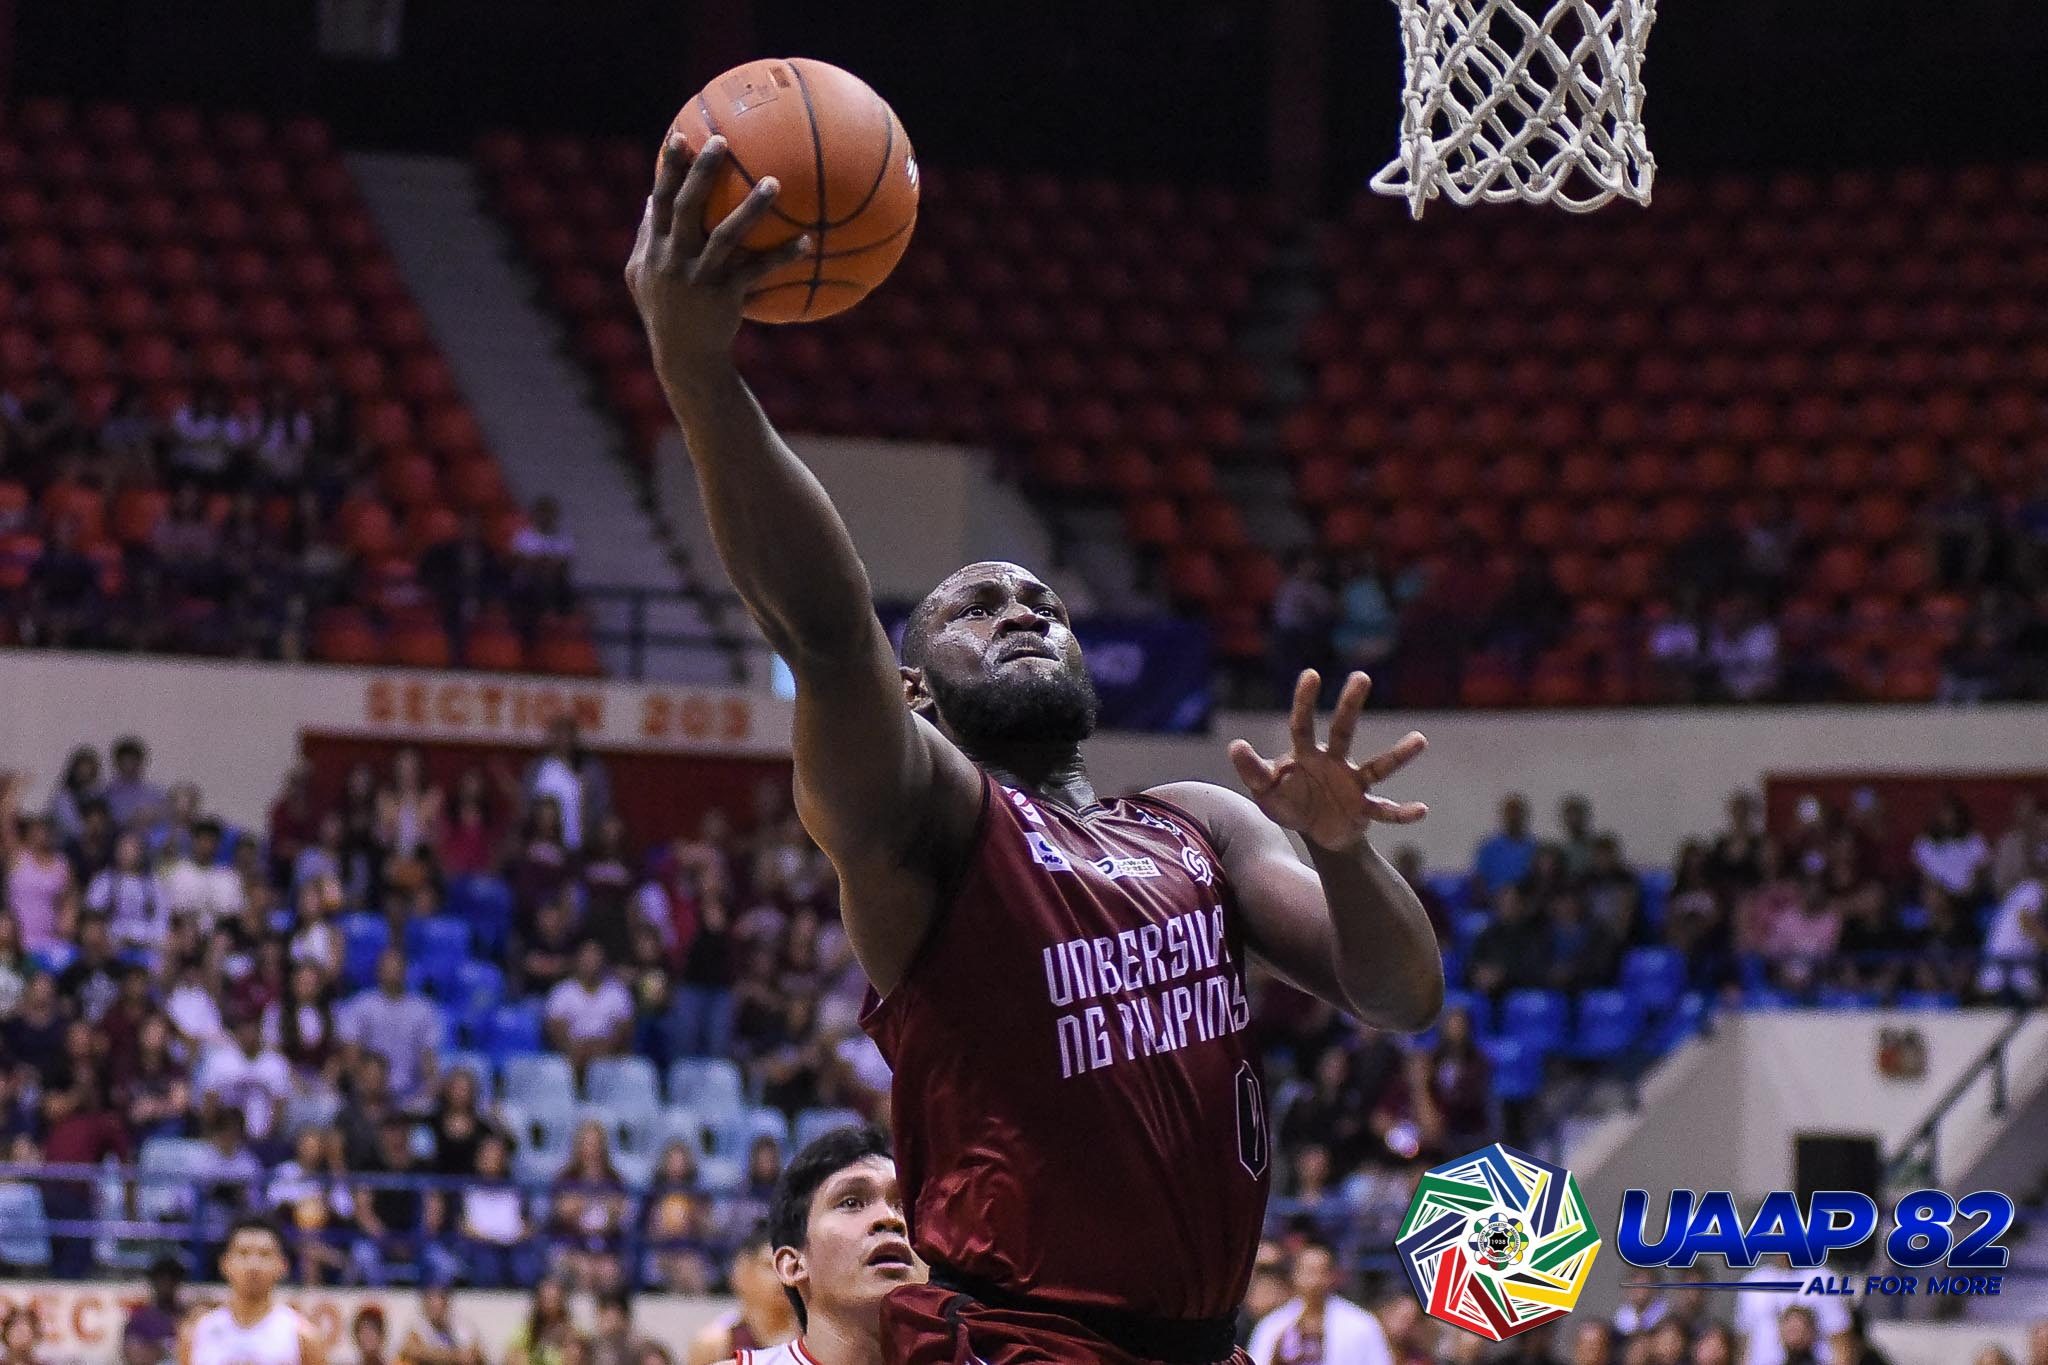 COMING THROUGH. Reigning MVP Bright Akhuetie, who delivers a team-high 16 points, helps the Maroons stay poised amid the Warriors' comeback bid. Photo release